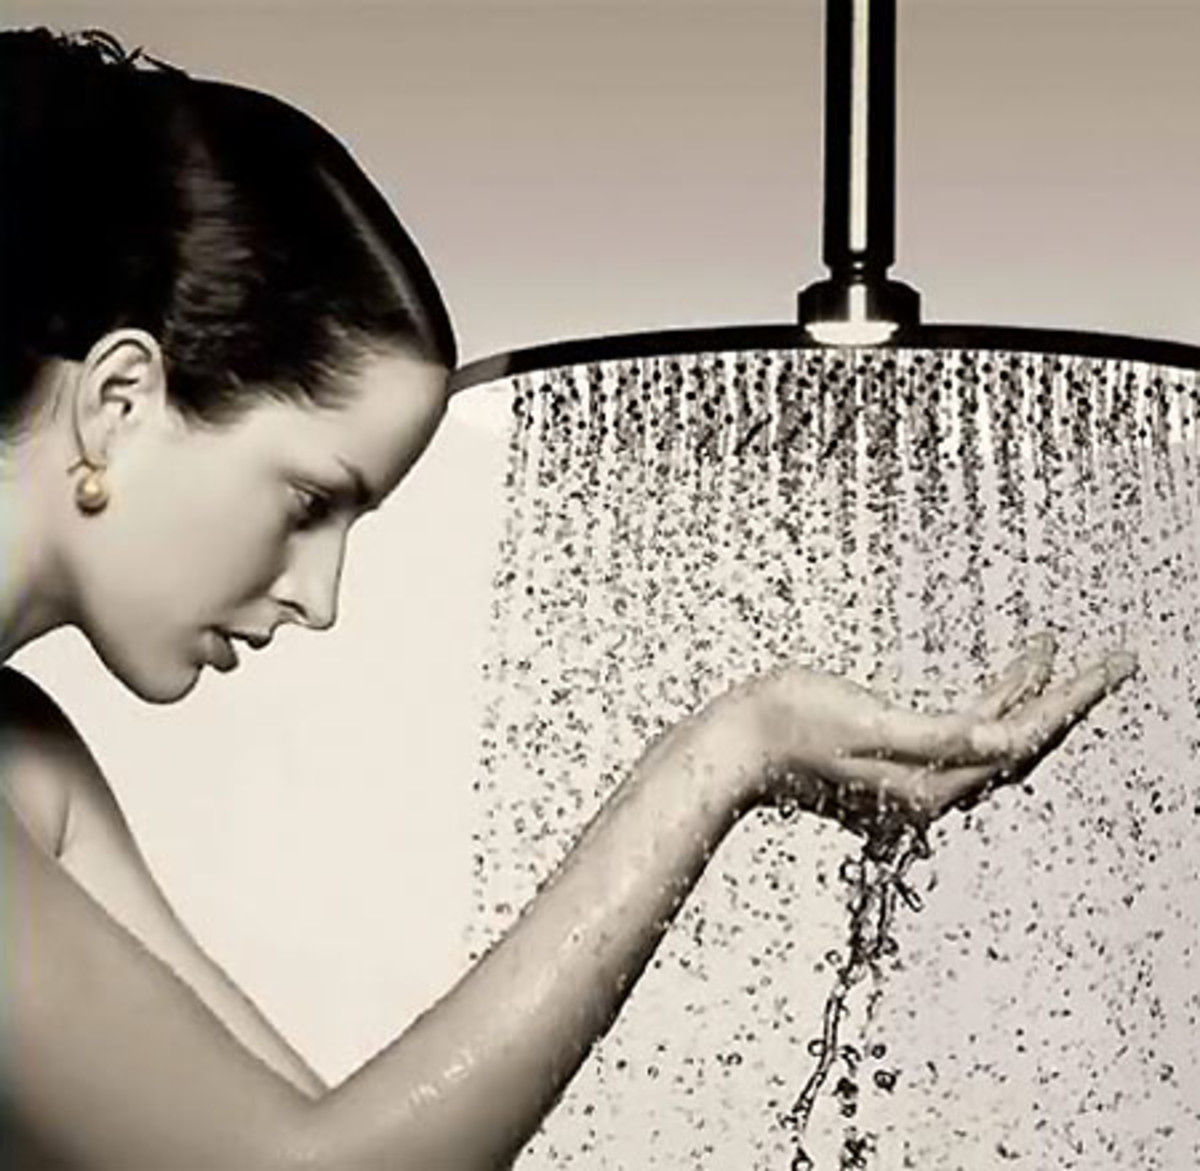 Dry Skin Shower Rules from a Top Dermatologist (Teach Your